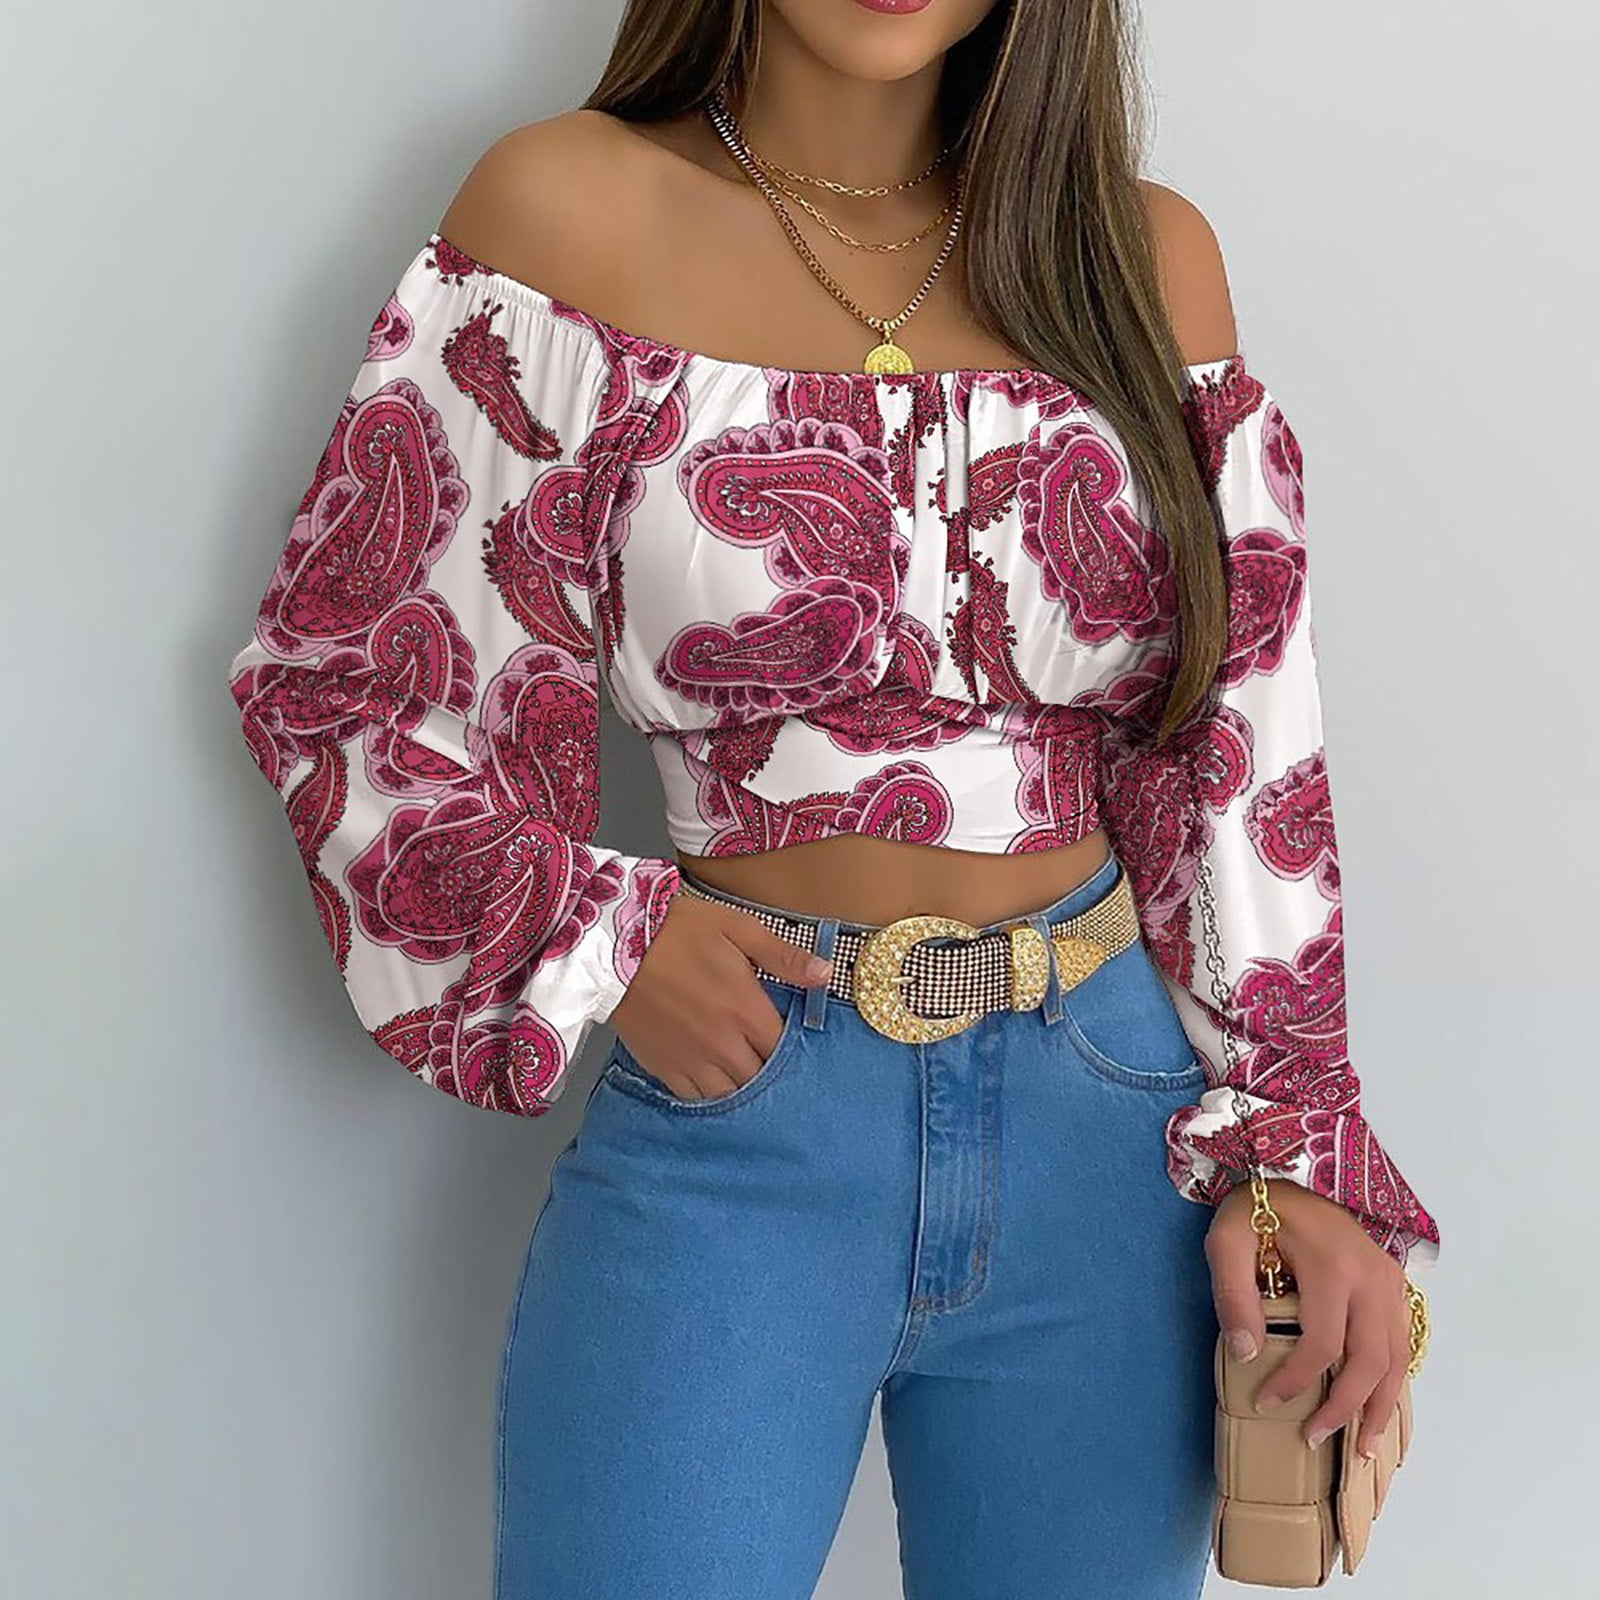 HTNBO Cute Crop Tops for Women Summer Fall Trends Lattern Long Sleeve  Floral Casual Cami Shirts 